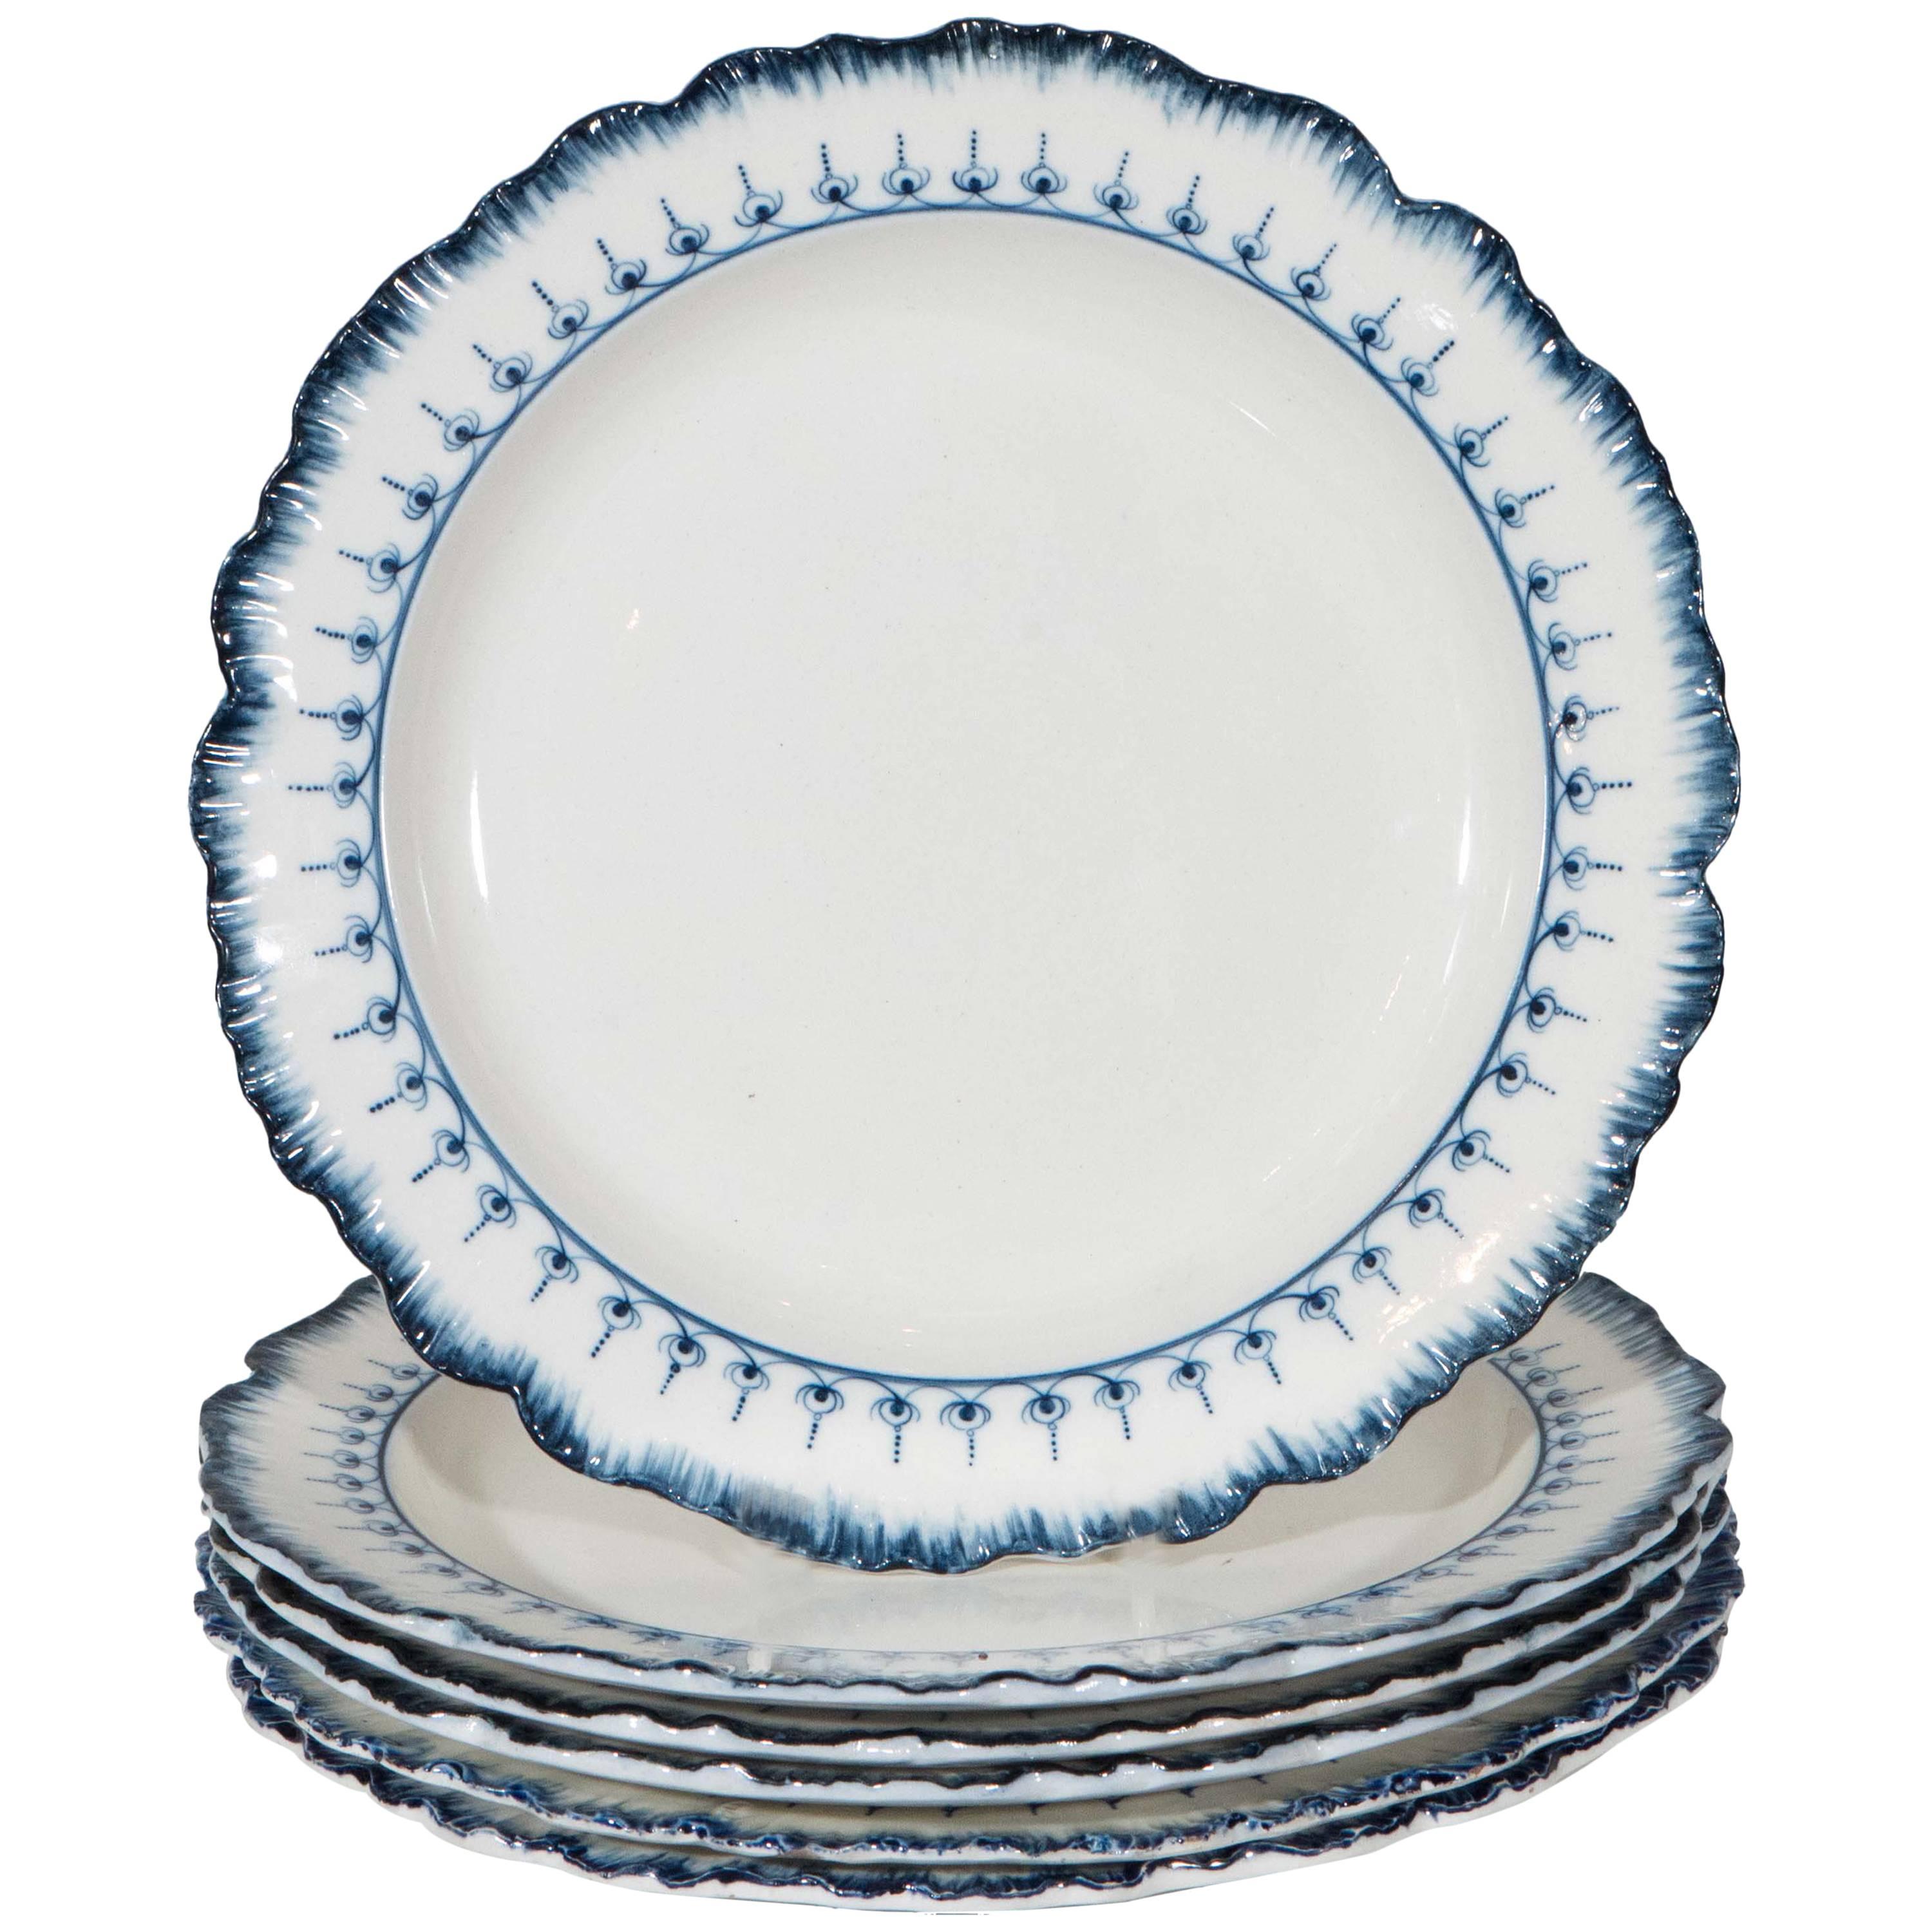 Antique Blue and White Wedgwood Dishes